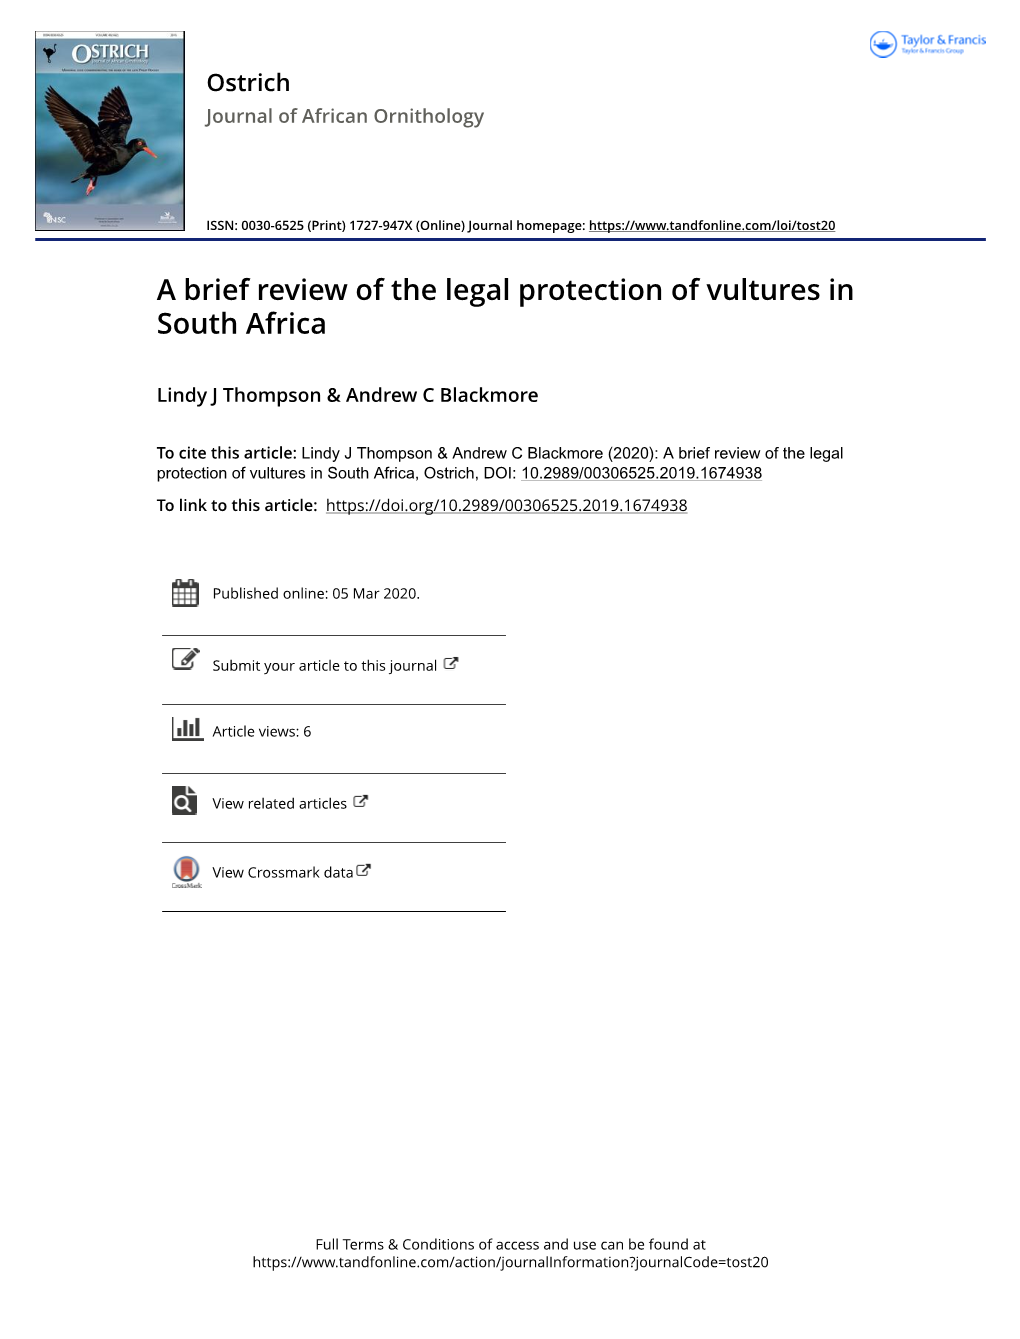 Review of the Legal Protection of Vultures in South Africa